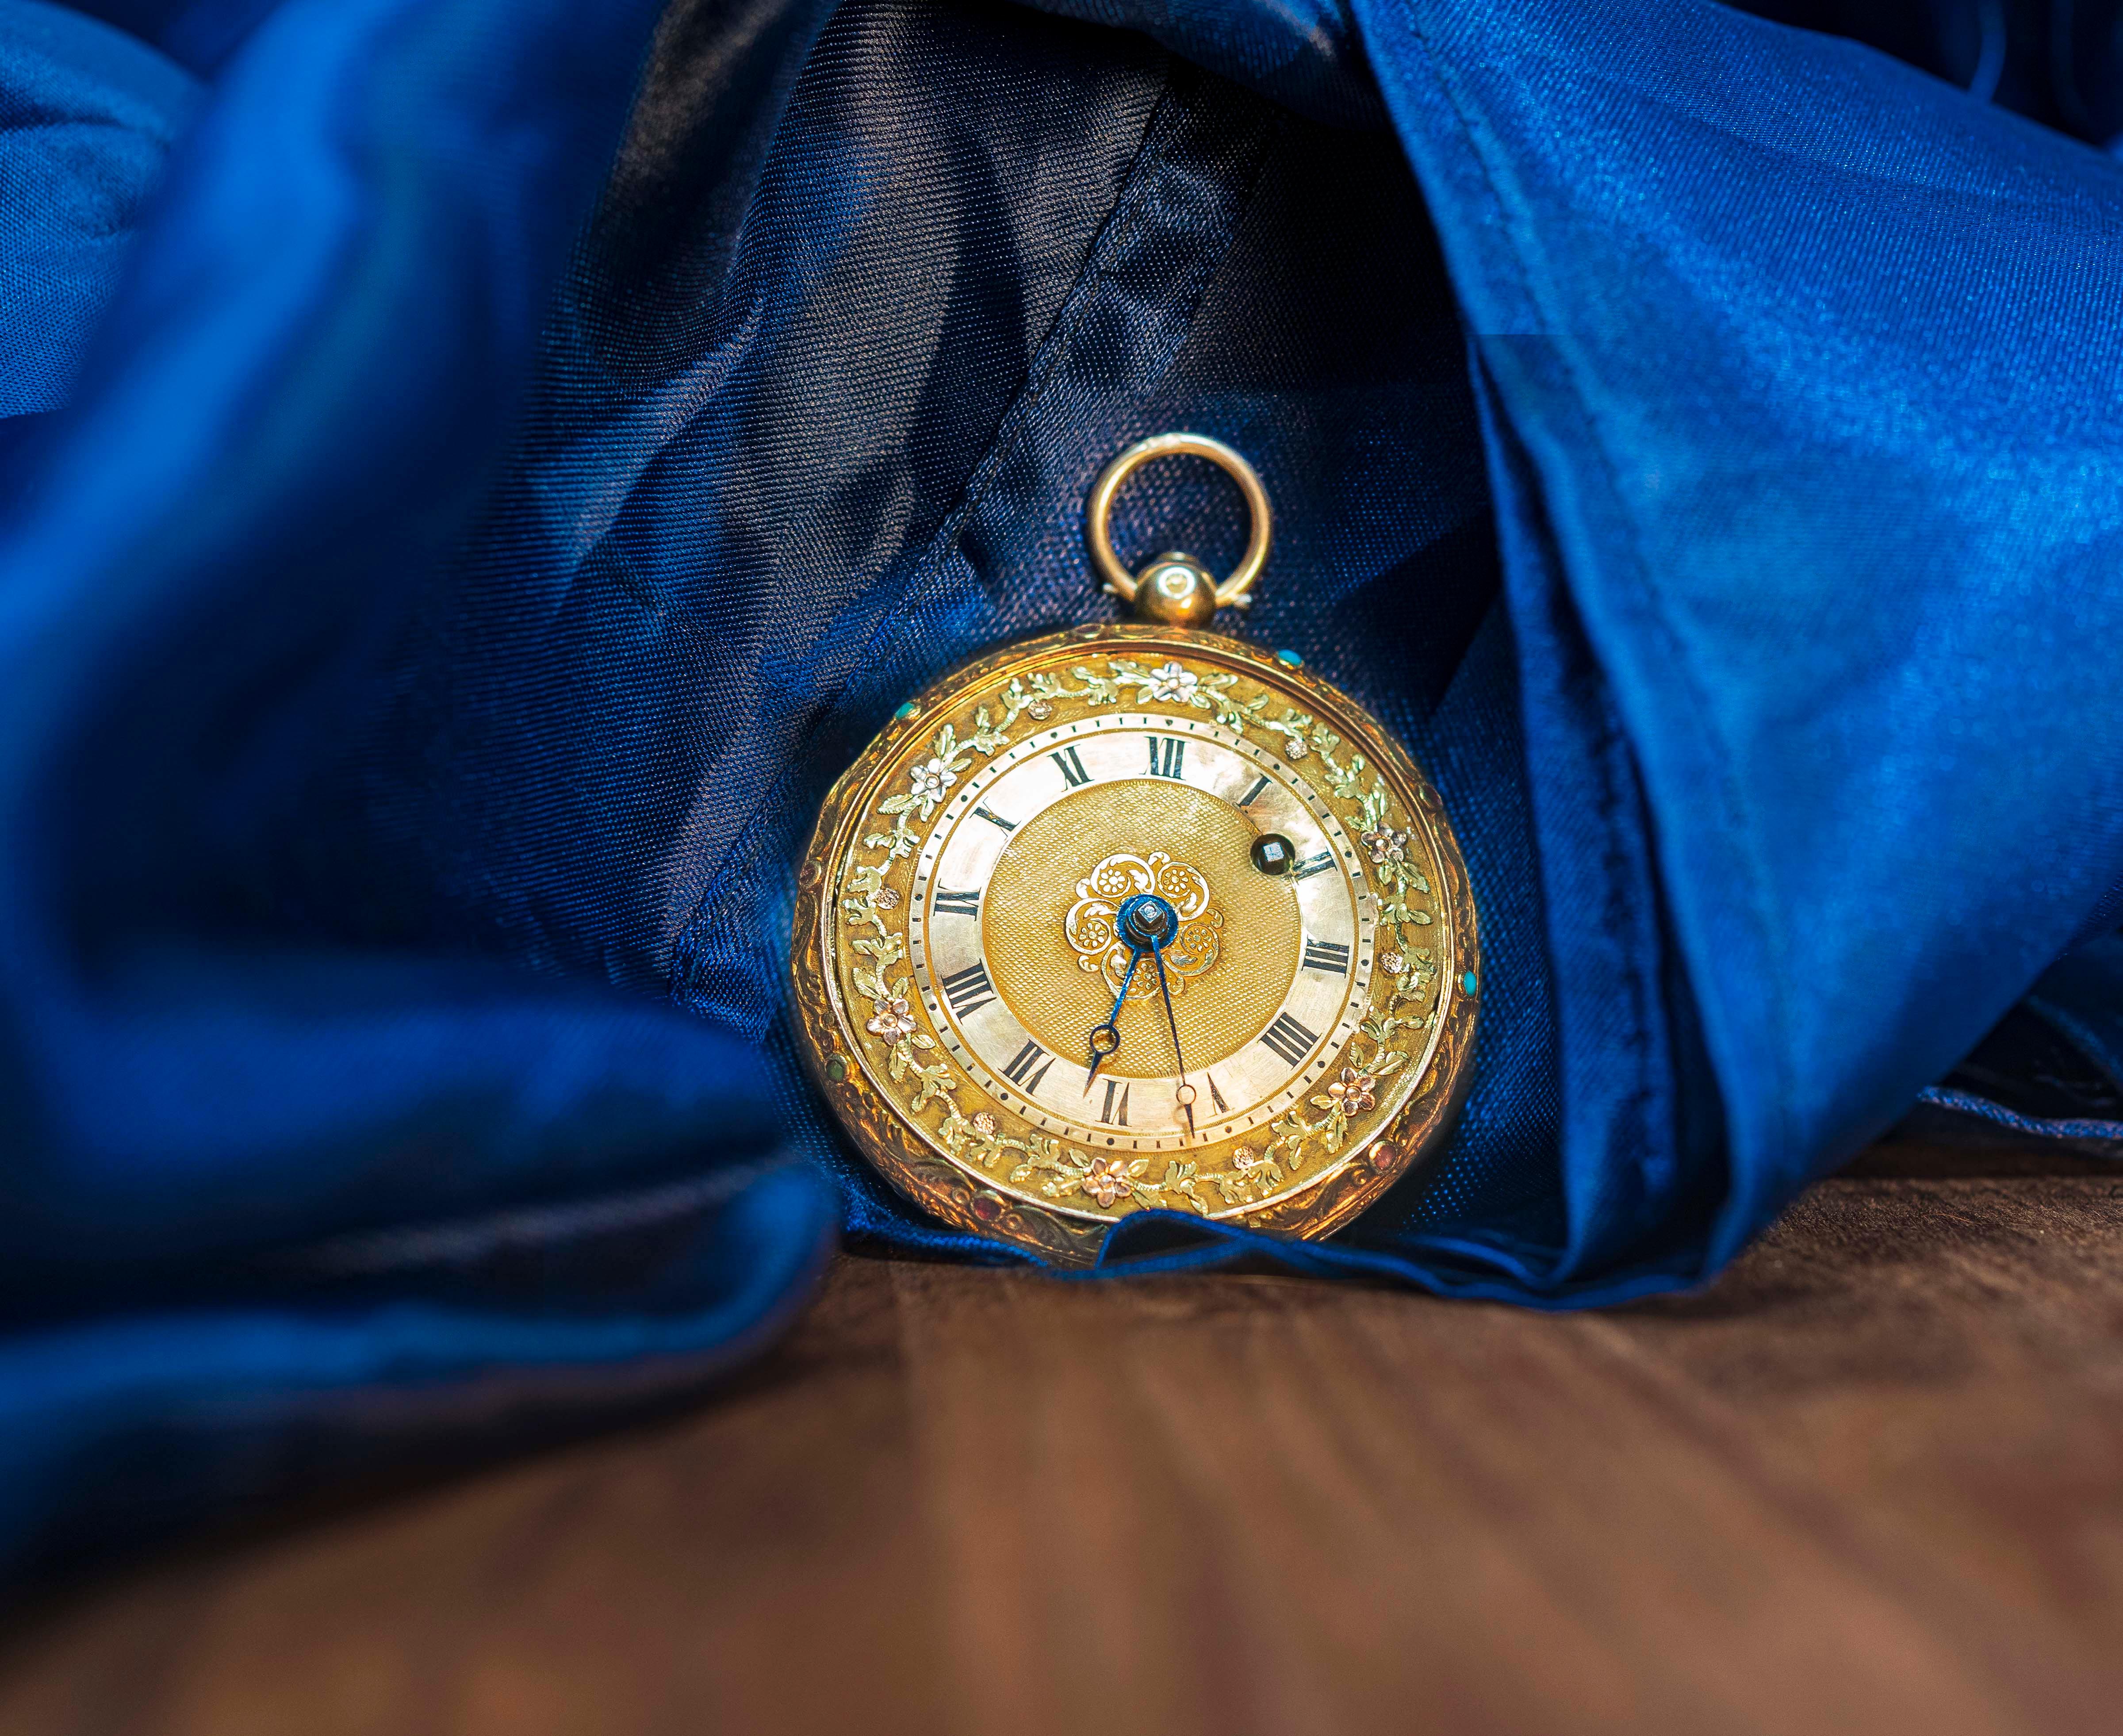 Beautiful French fusee pocket watch from late XVIII-very beginning of XIX century, 1790-1800s.

Solid 18k 